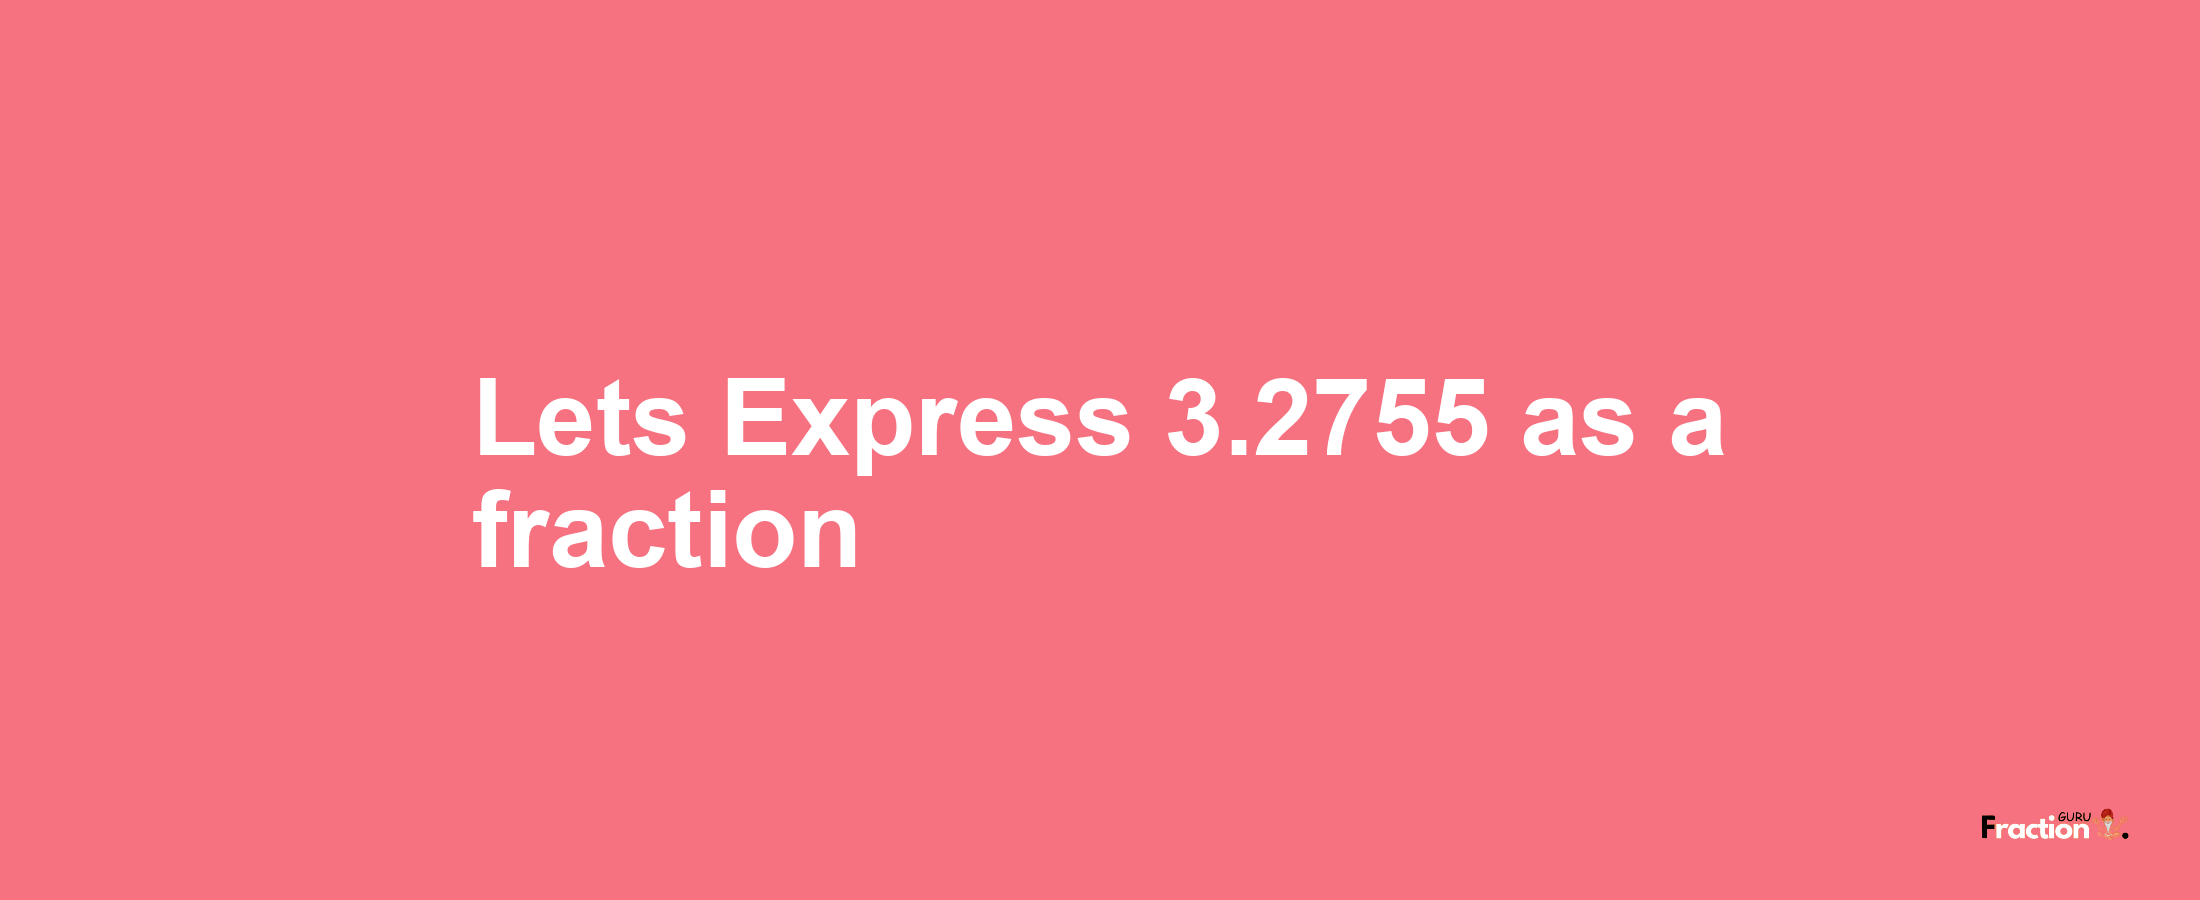 Lets Express 3.2755 as afraction